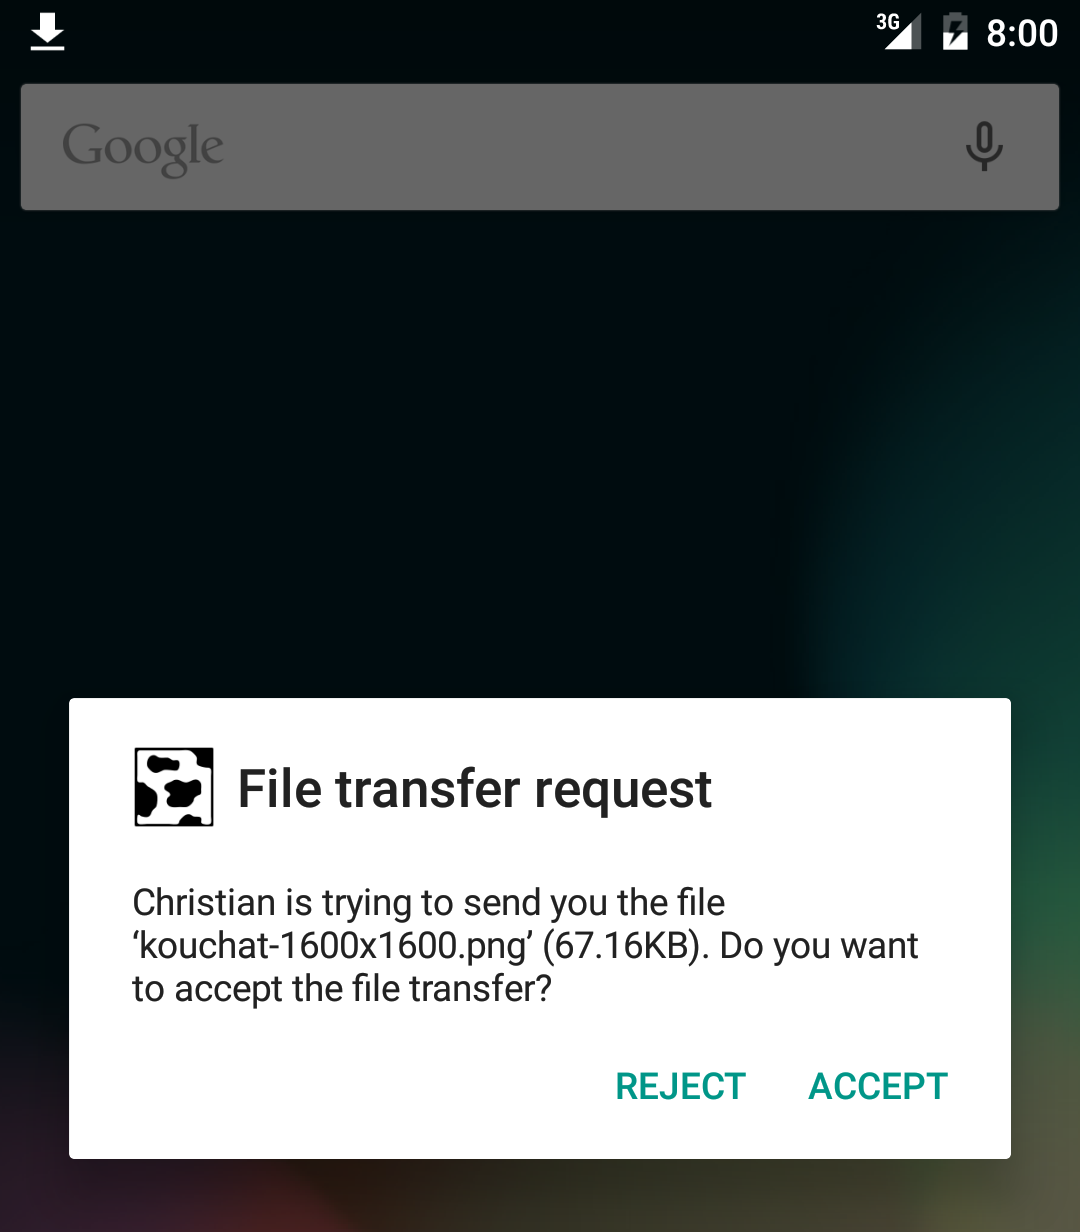 Choose to receive the file